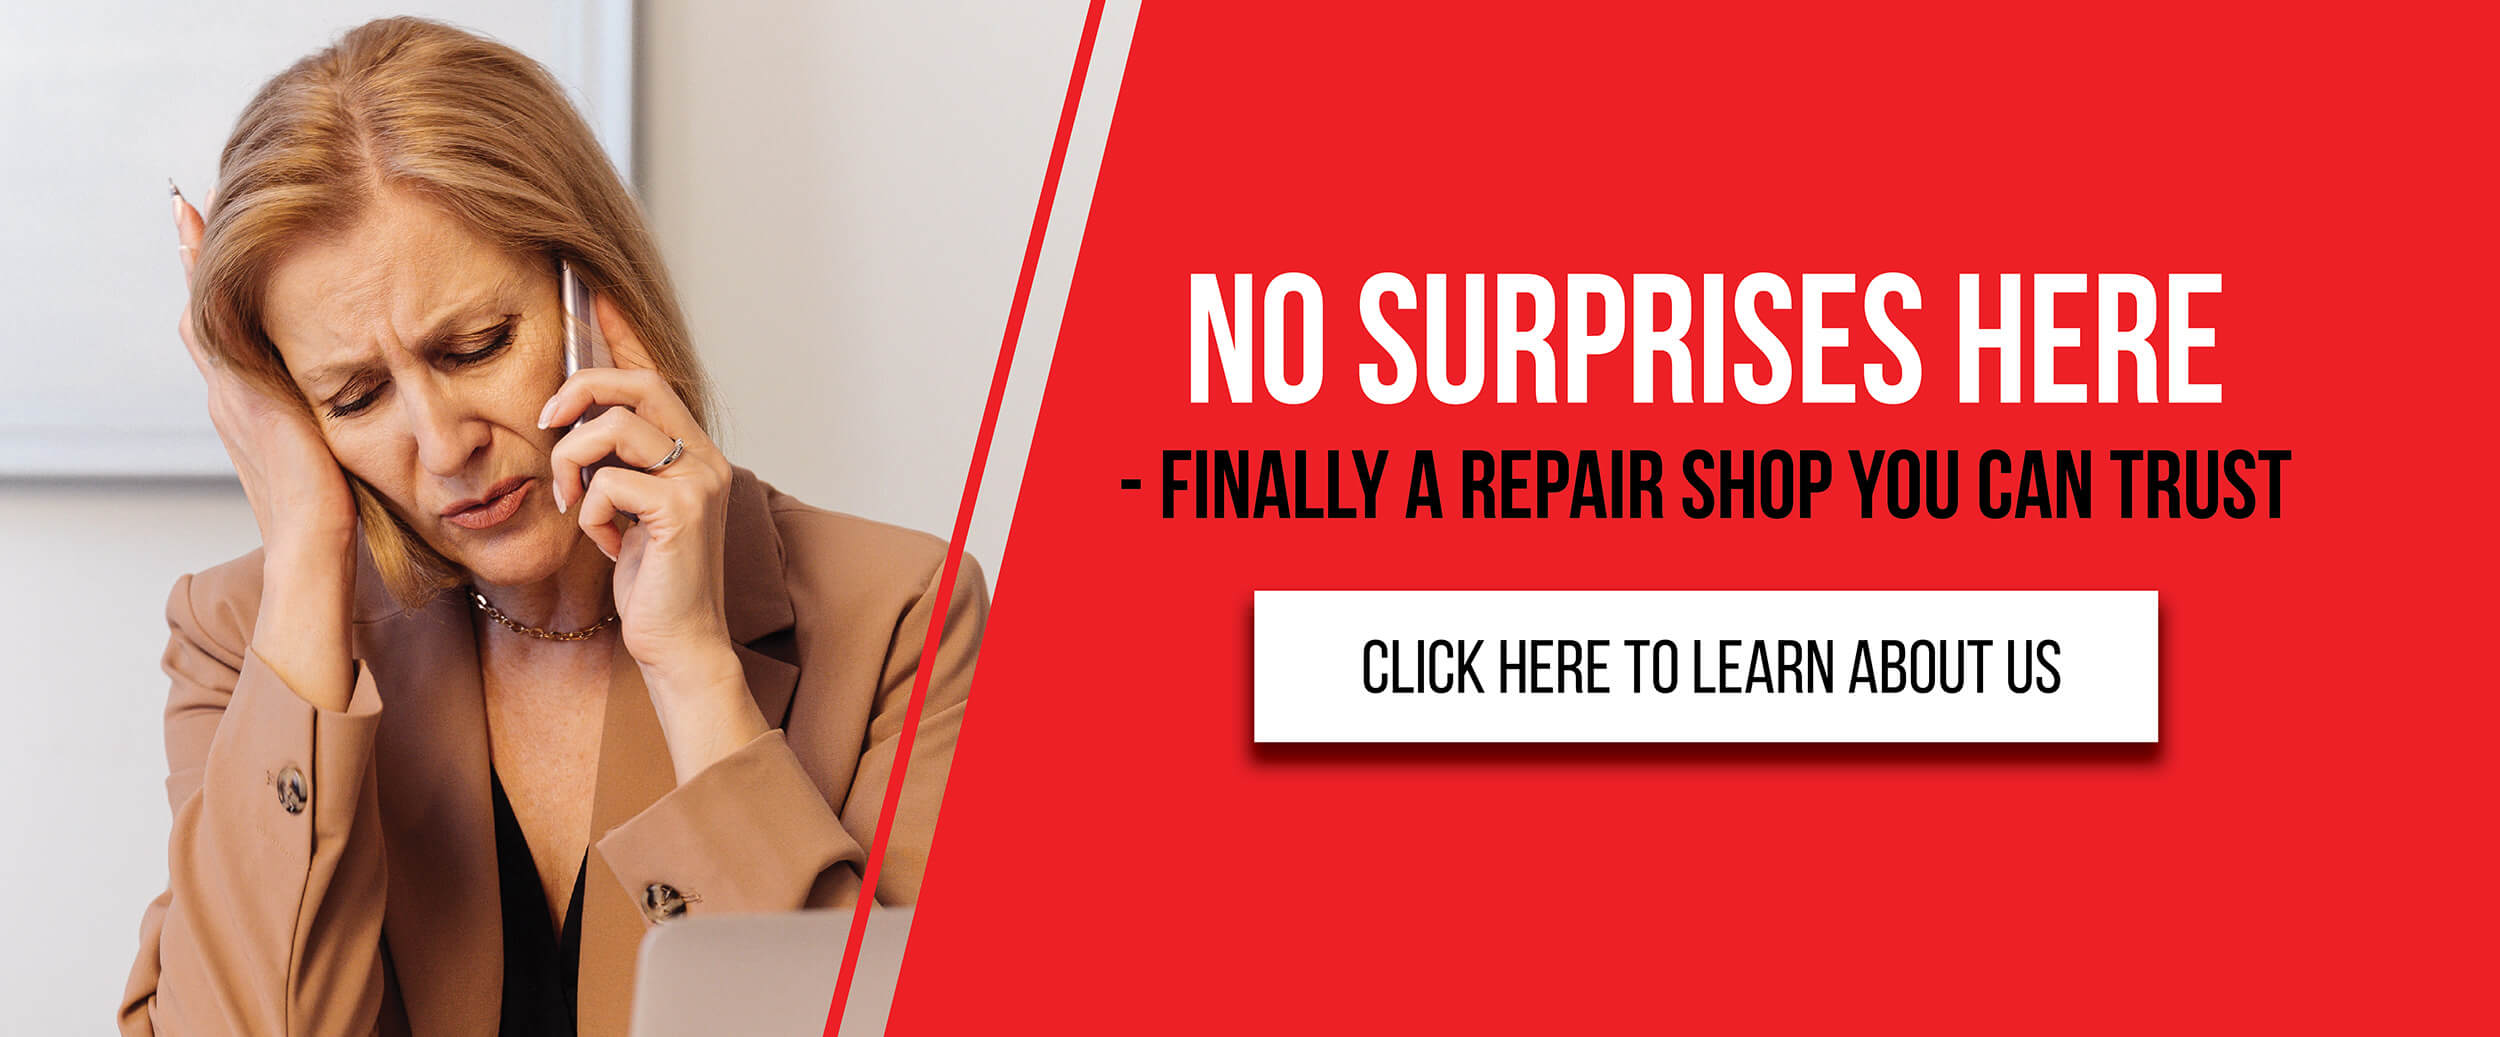 Finally a repair shop you can trust - click here to learn more about us